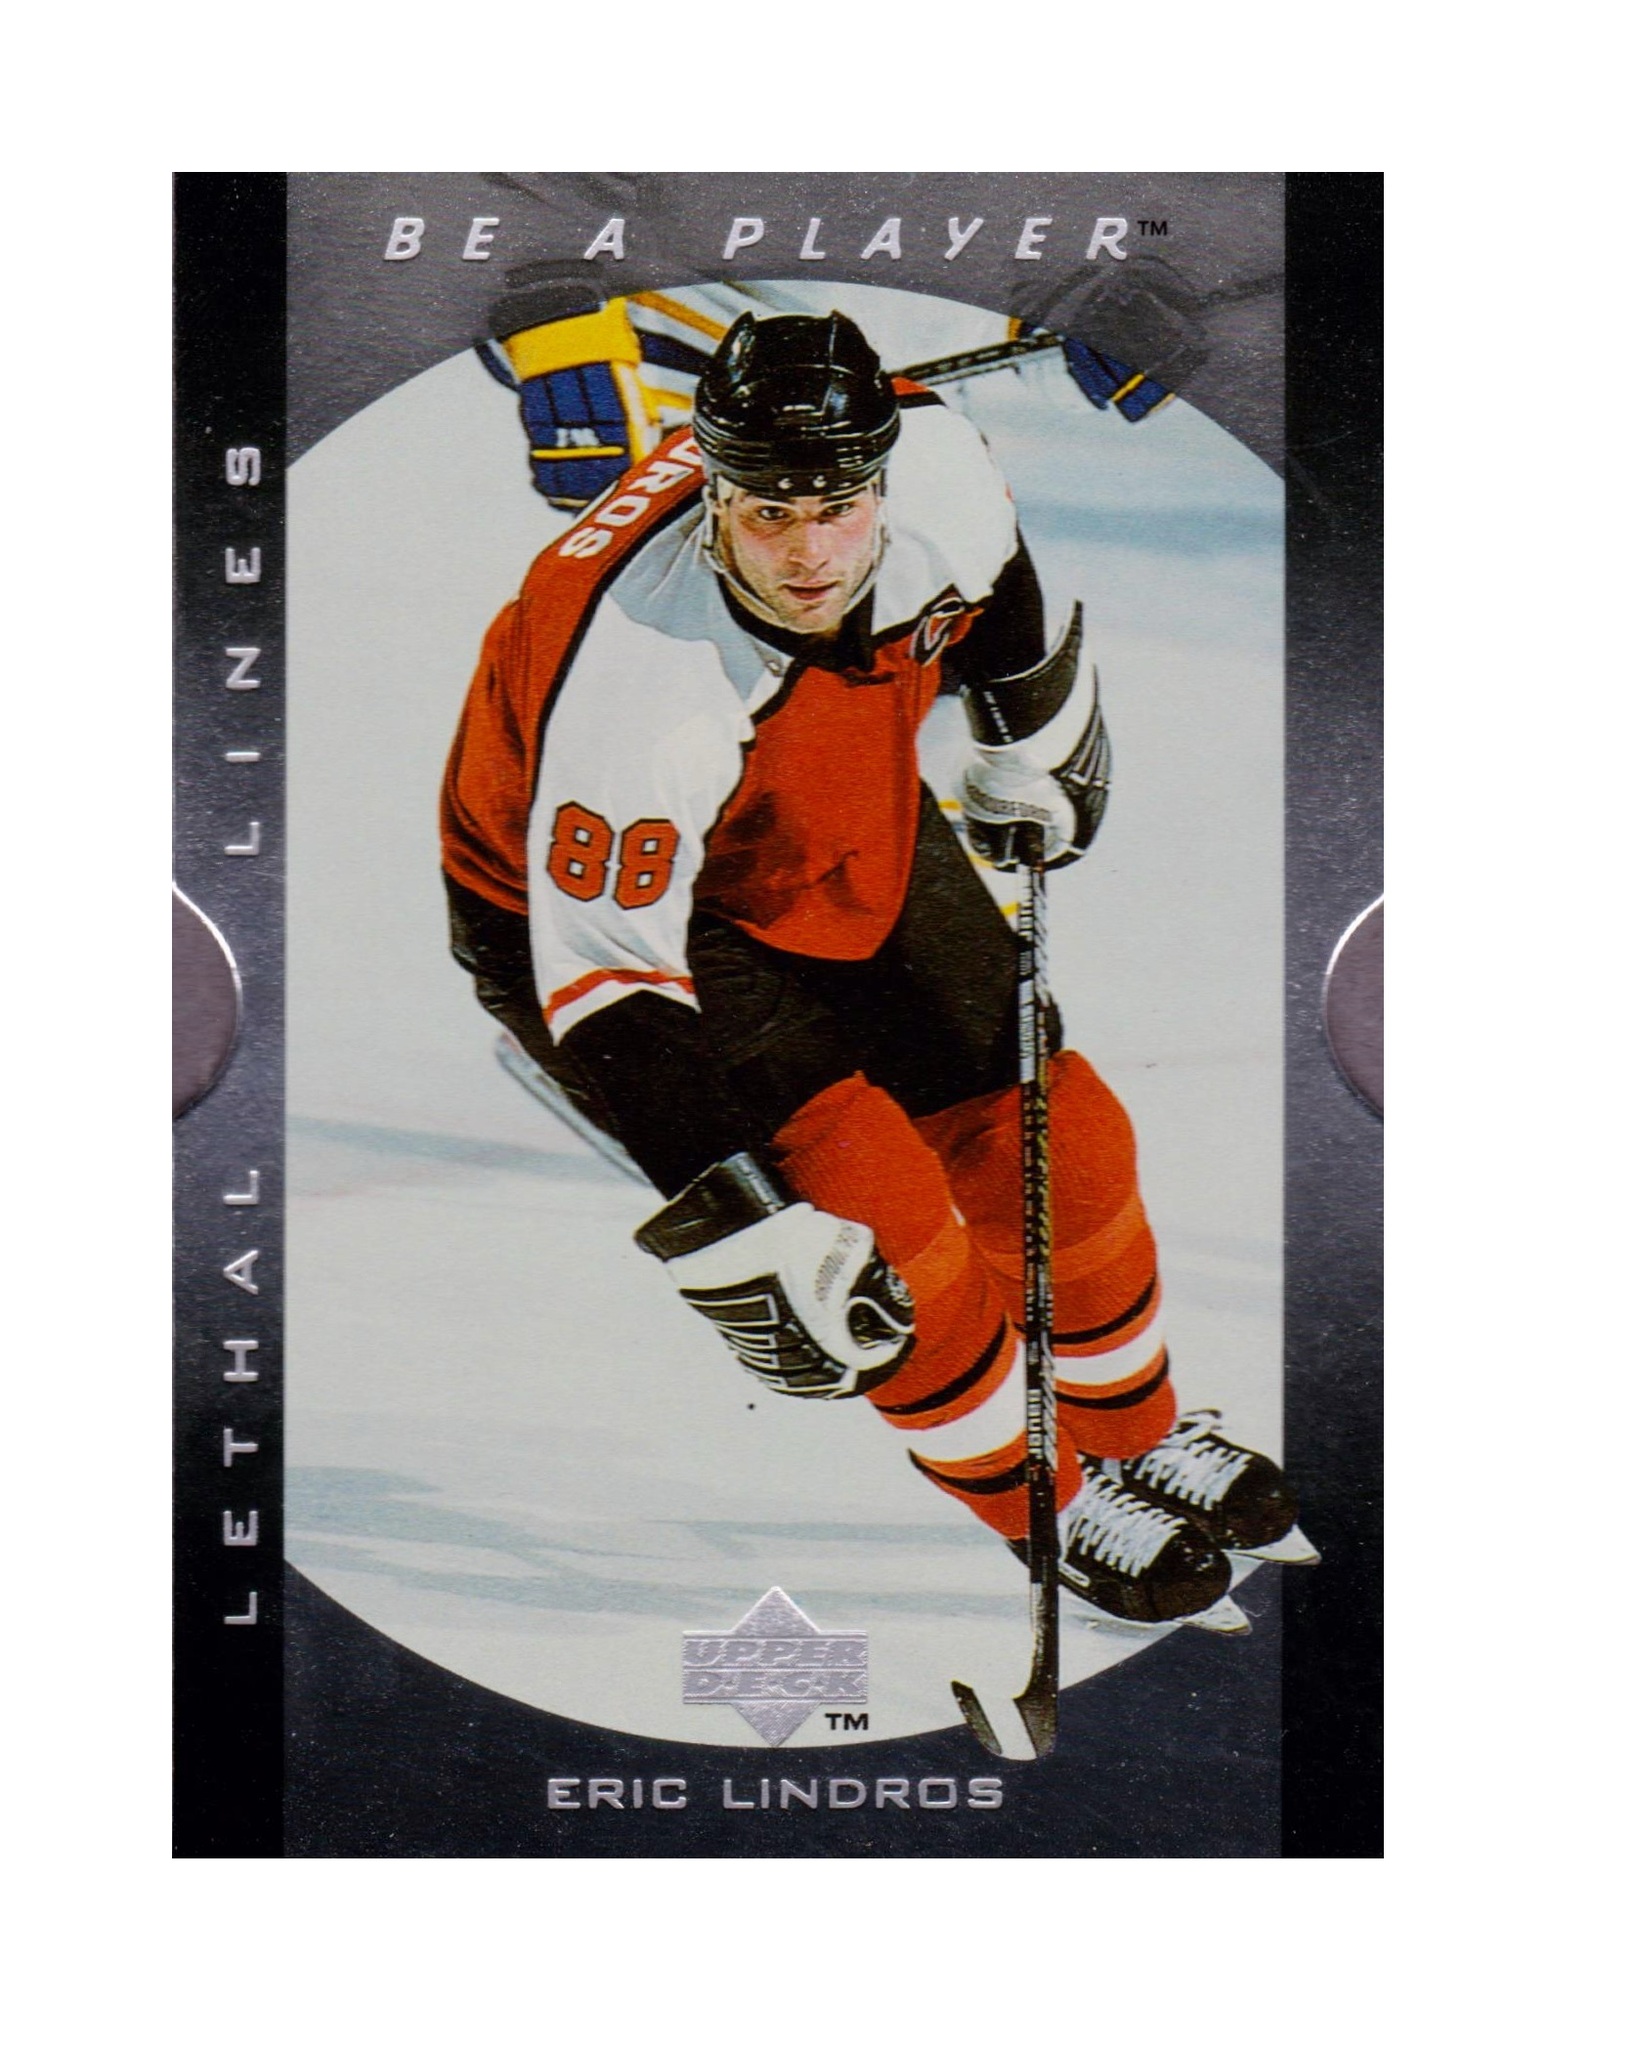 1995-96 Be A Player Lethal Lines #LL14 Eric Lindros (15-265x4-FLYERS)